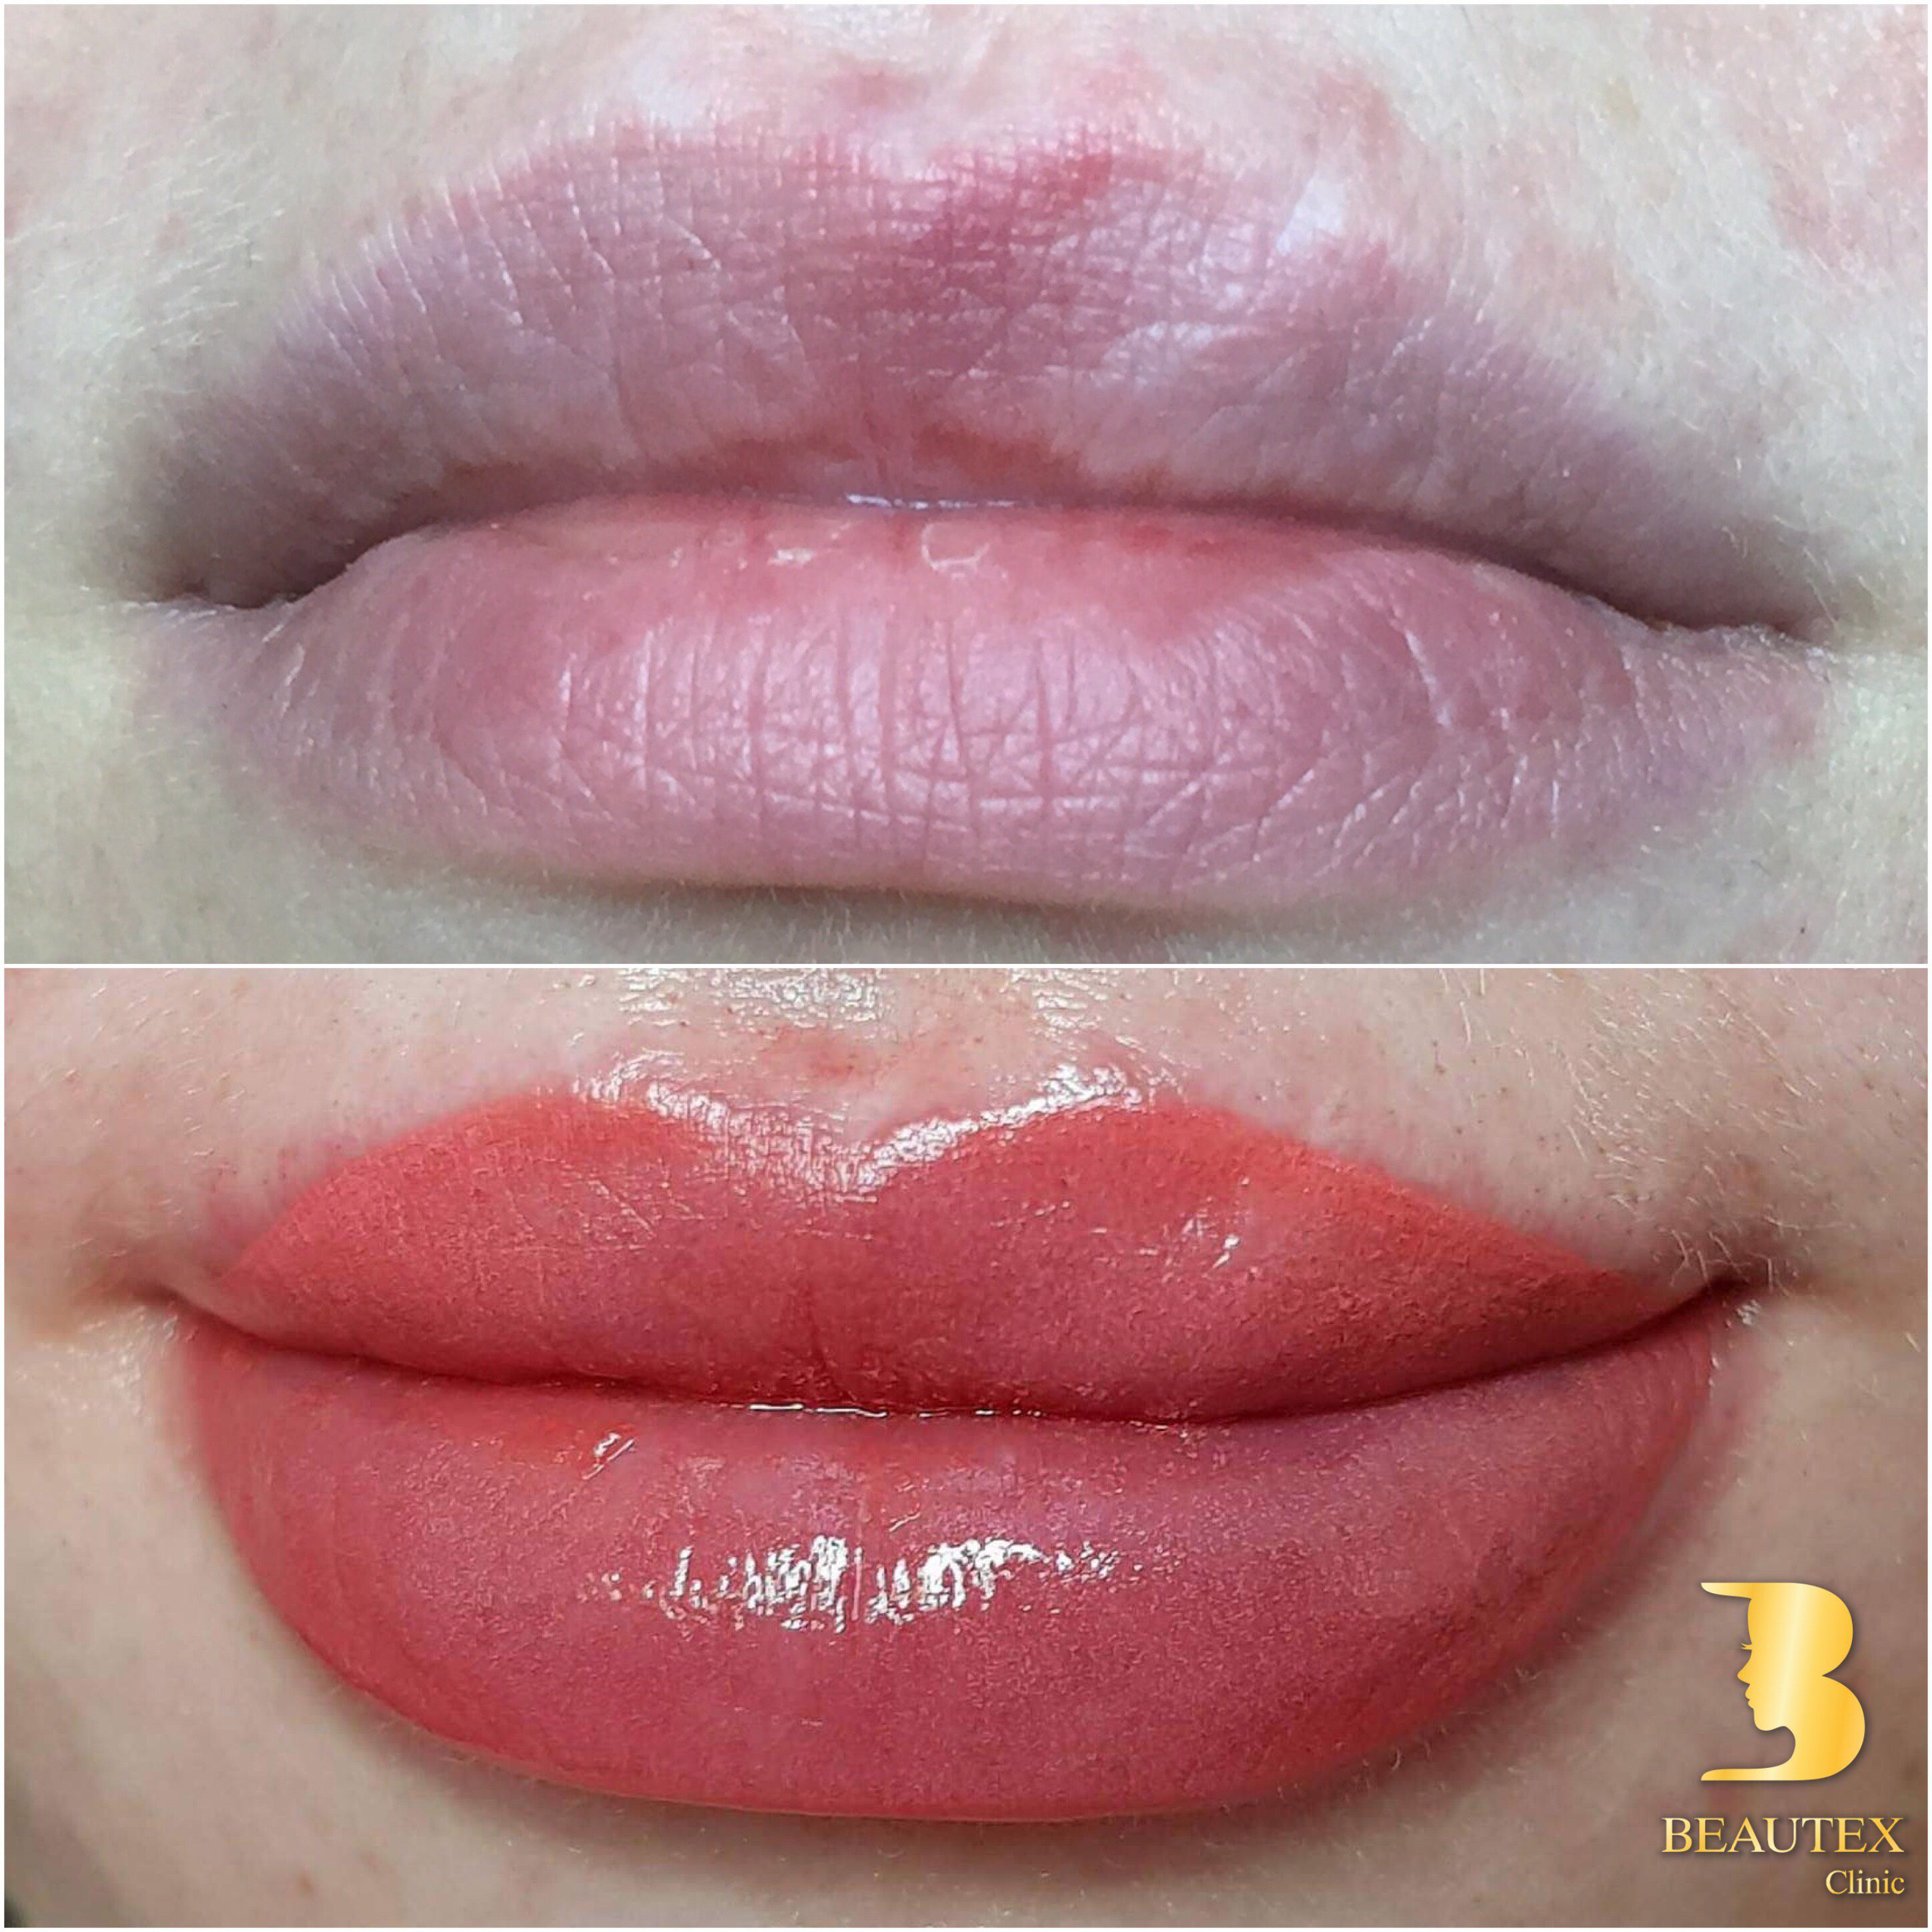 A woman's lips before and after lip filler.